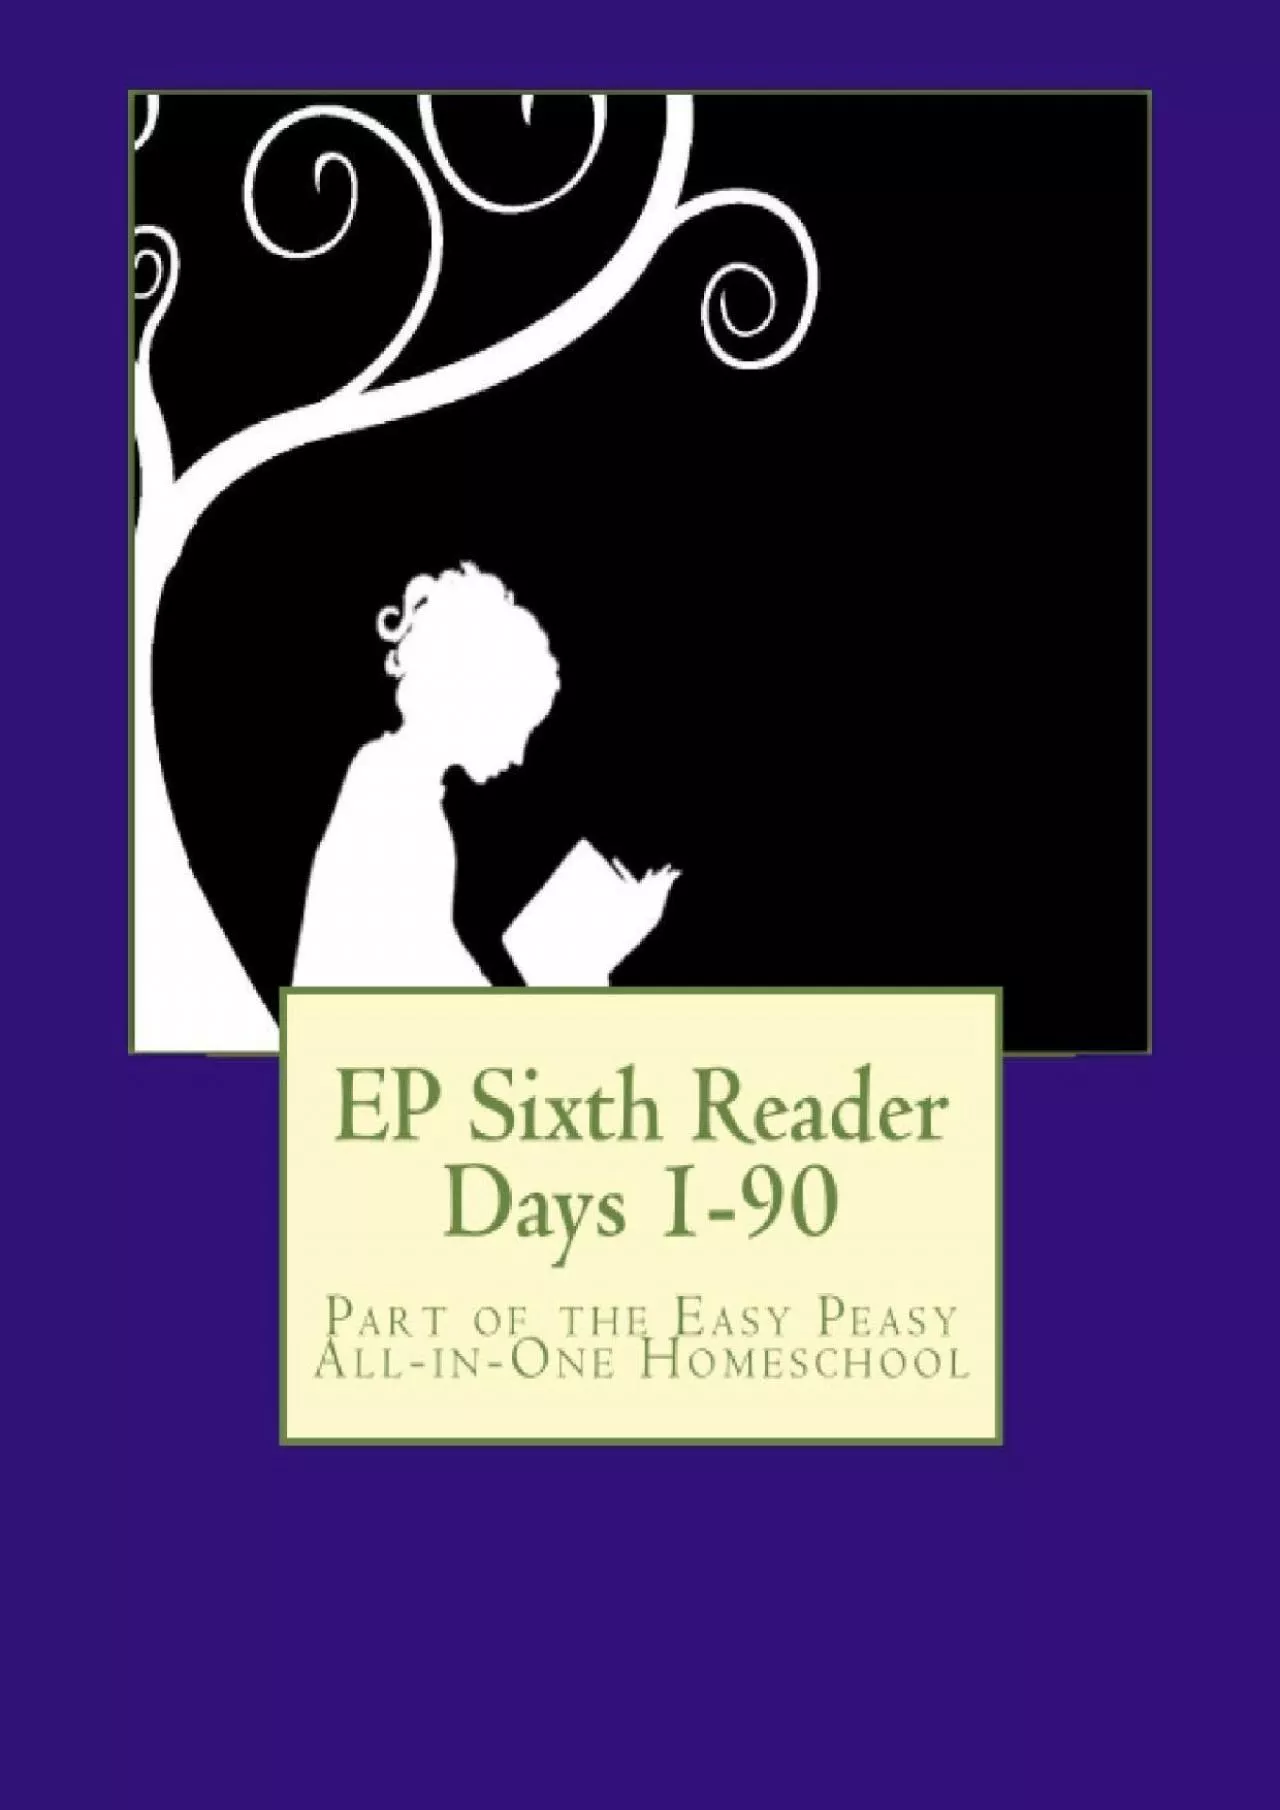 [READ] EP Sixth Reader Days 1-90: Part of the Easy Peasy All-in-One Homeschool (EP Reader